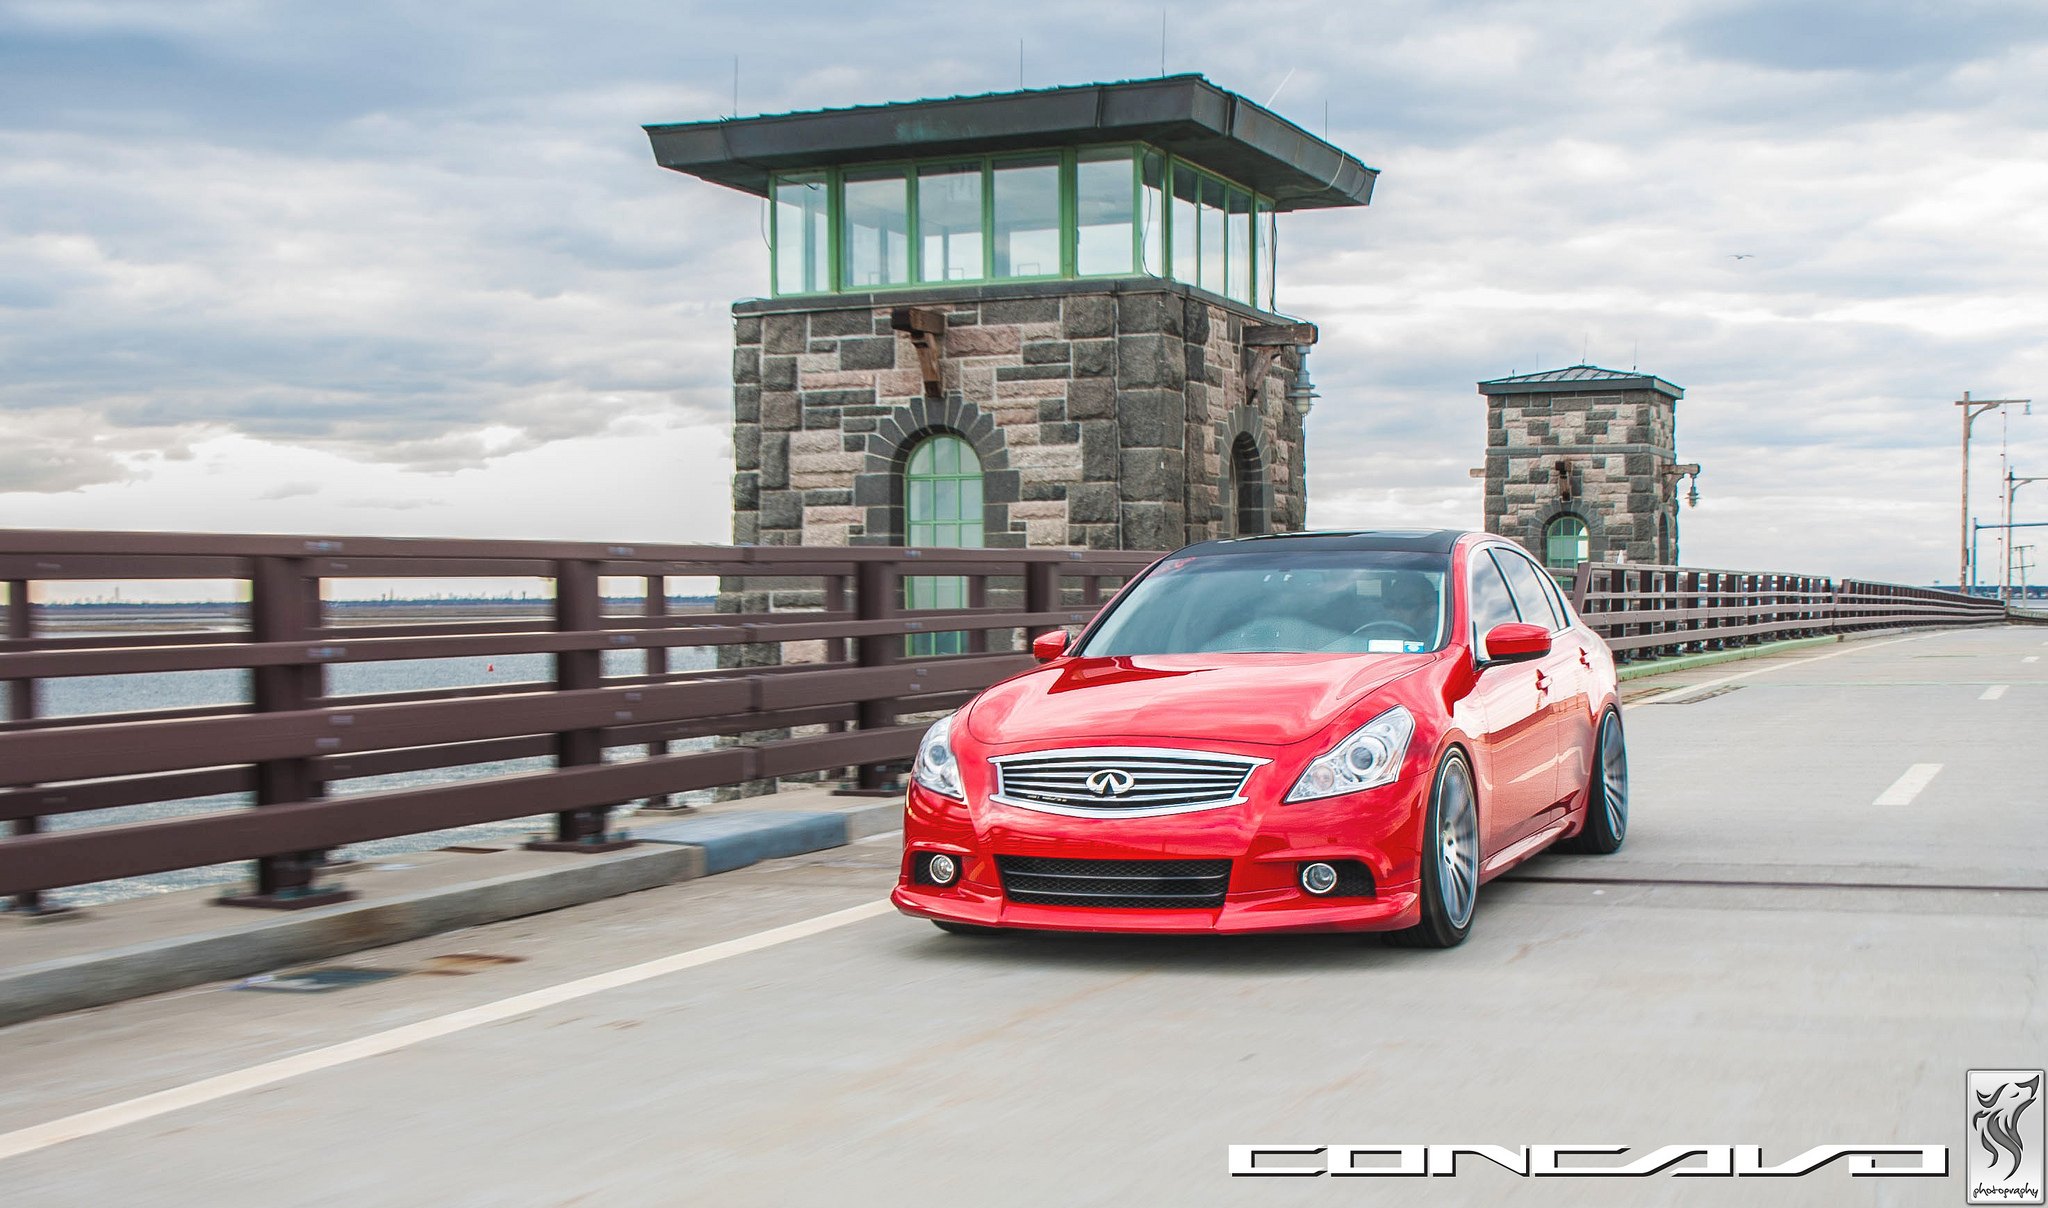 Crystal Clear Halo Headlights on Red Infiniti G37 - Photo by Vossen